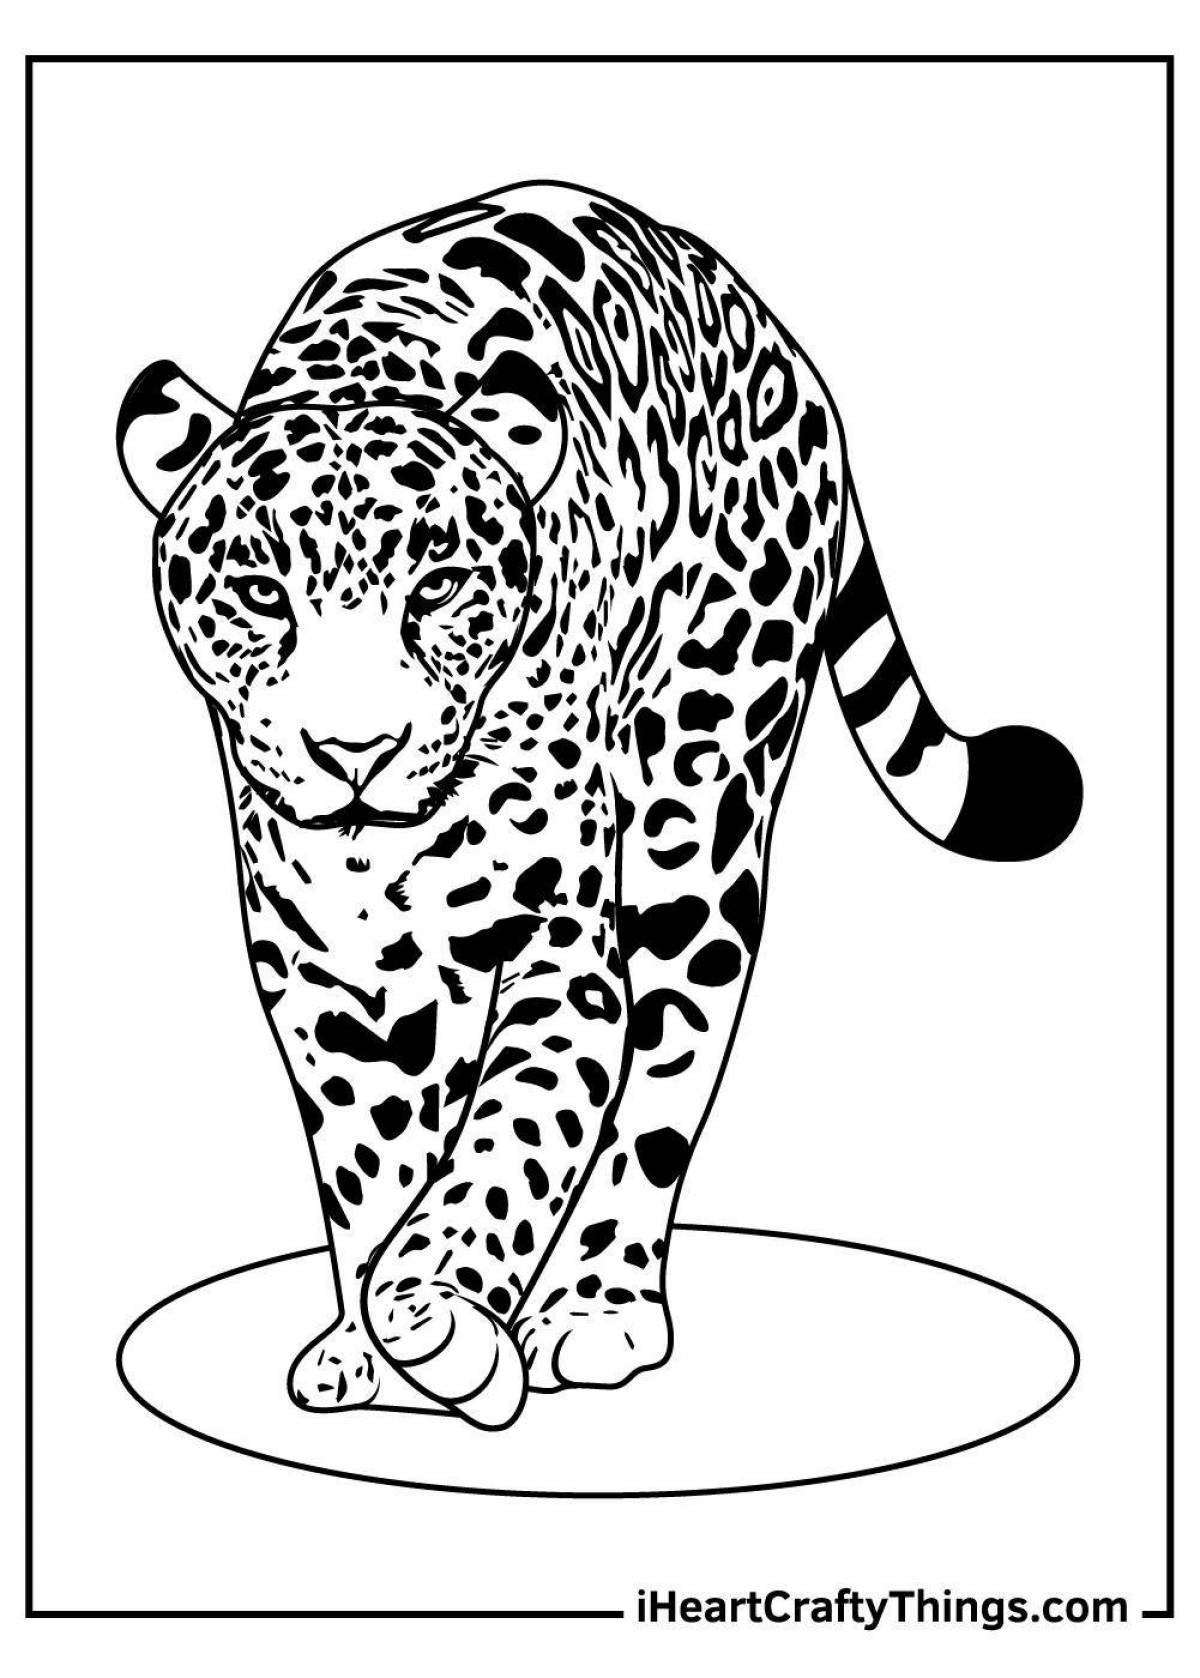 Artistic leopard coloring for children 5-6 years old